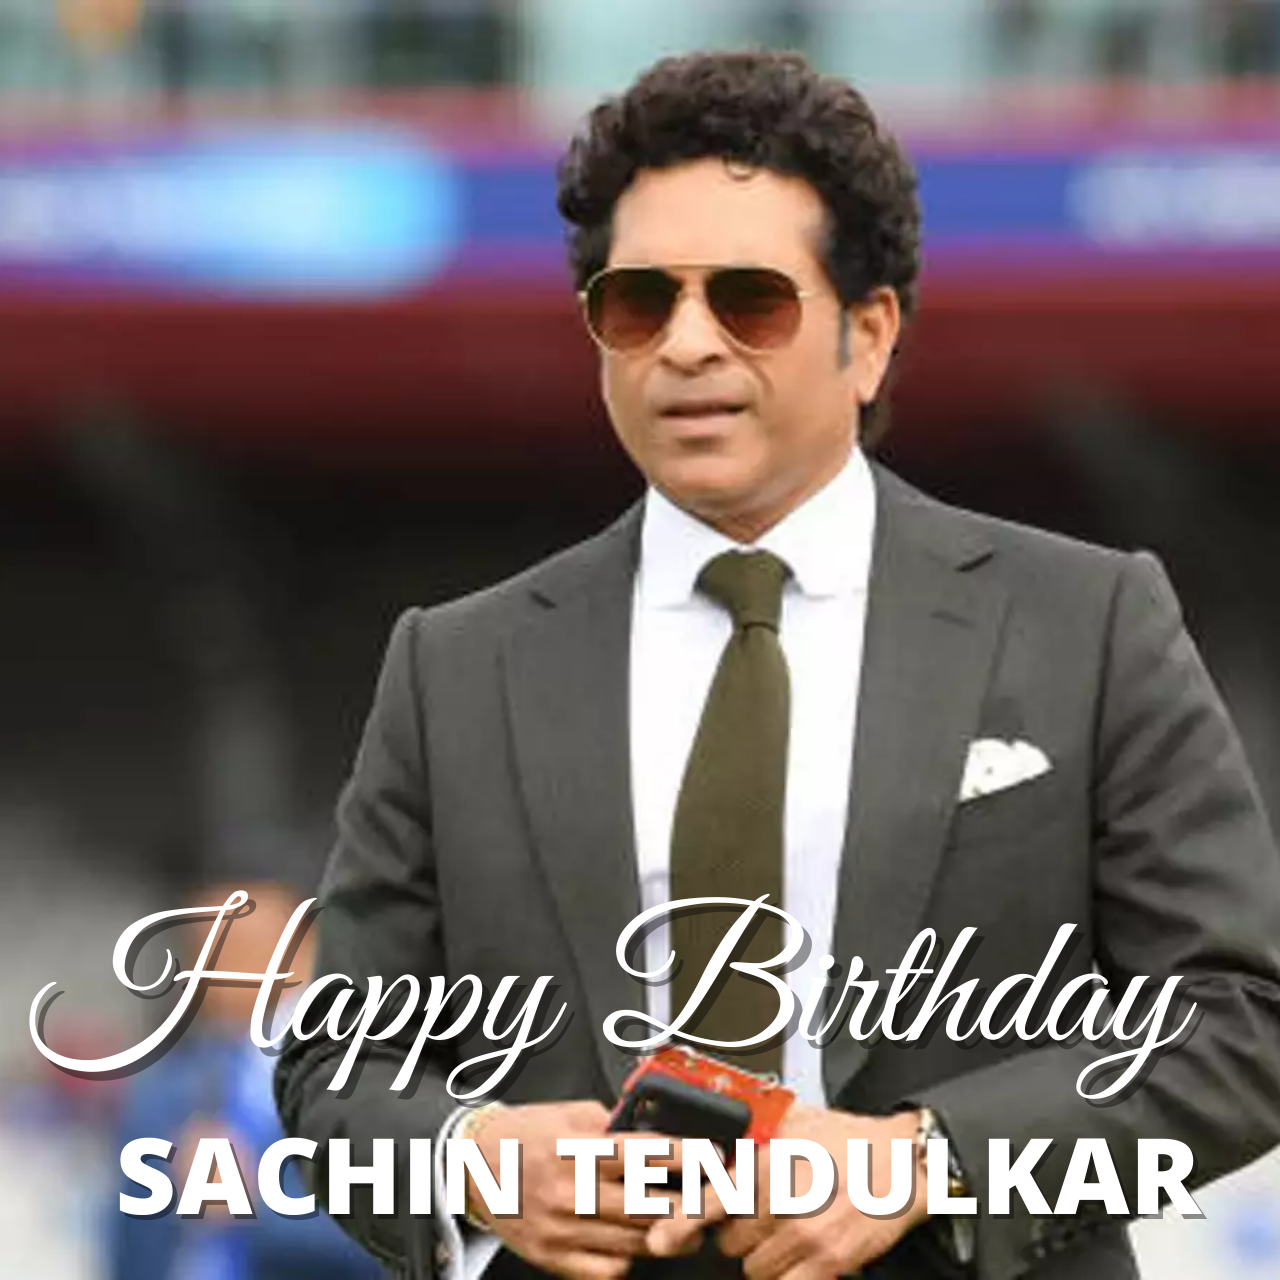 Happy Birthday Sachin Tendulkar Wishes, Messages, Greetings, and HD Images to Share